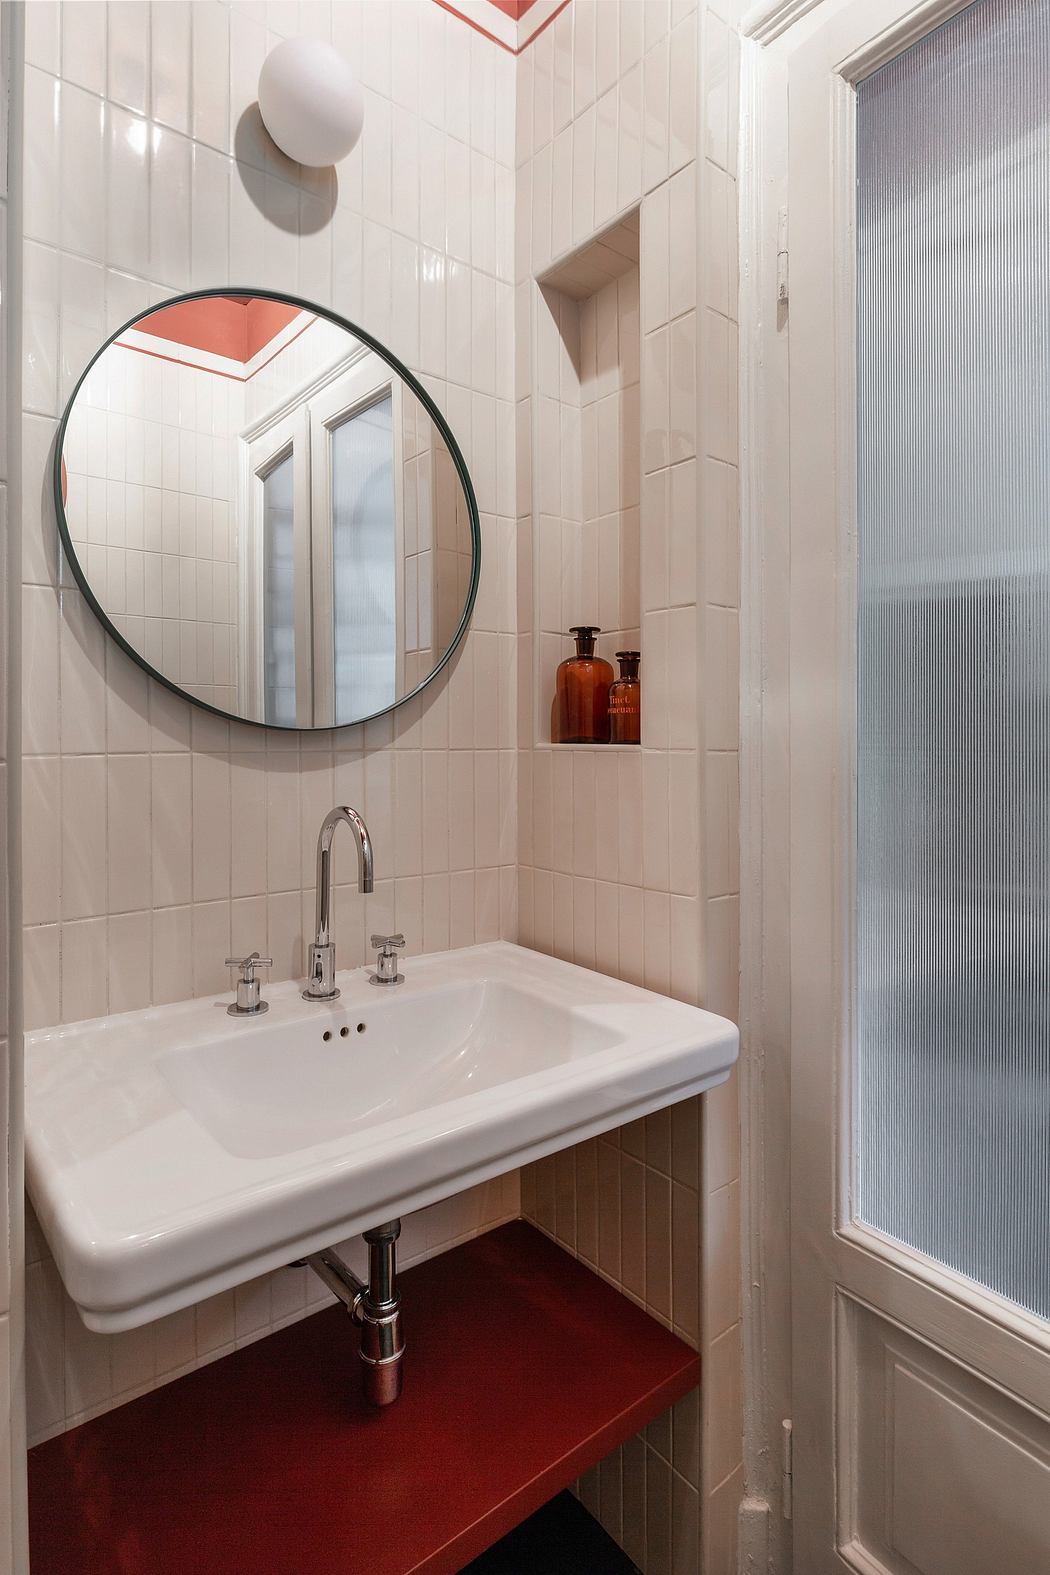 Small bathroom with white sink, circular mirror, and tiled walls.